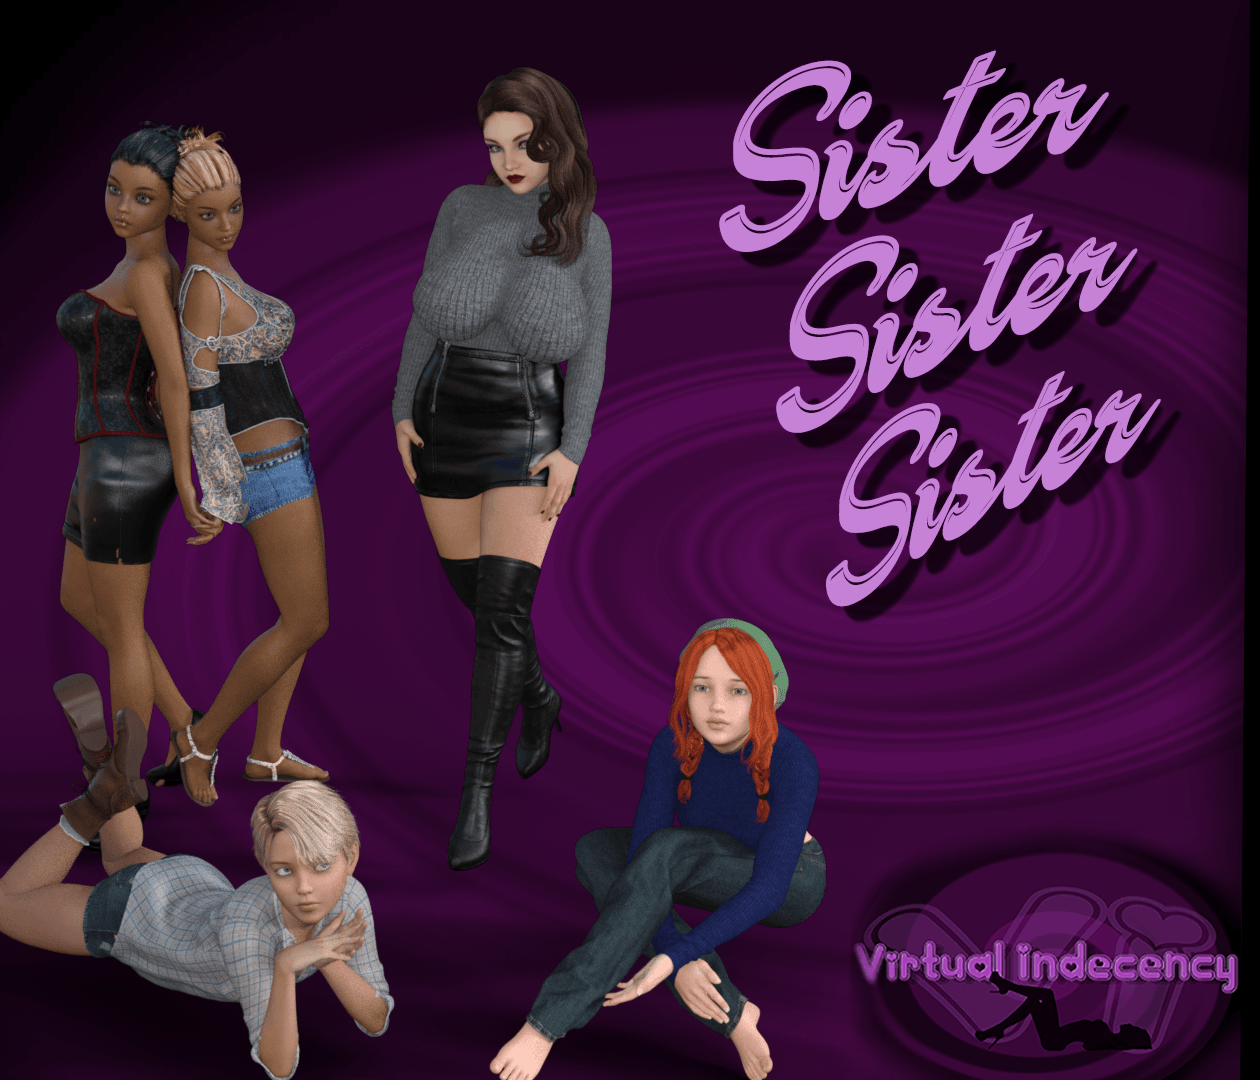 Sister, Sister, Sister – Chapter 3 SE - Free incest porn PC game 1